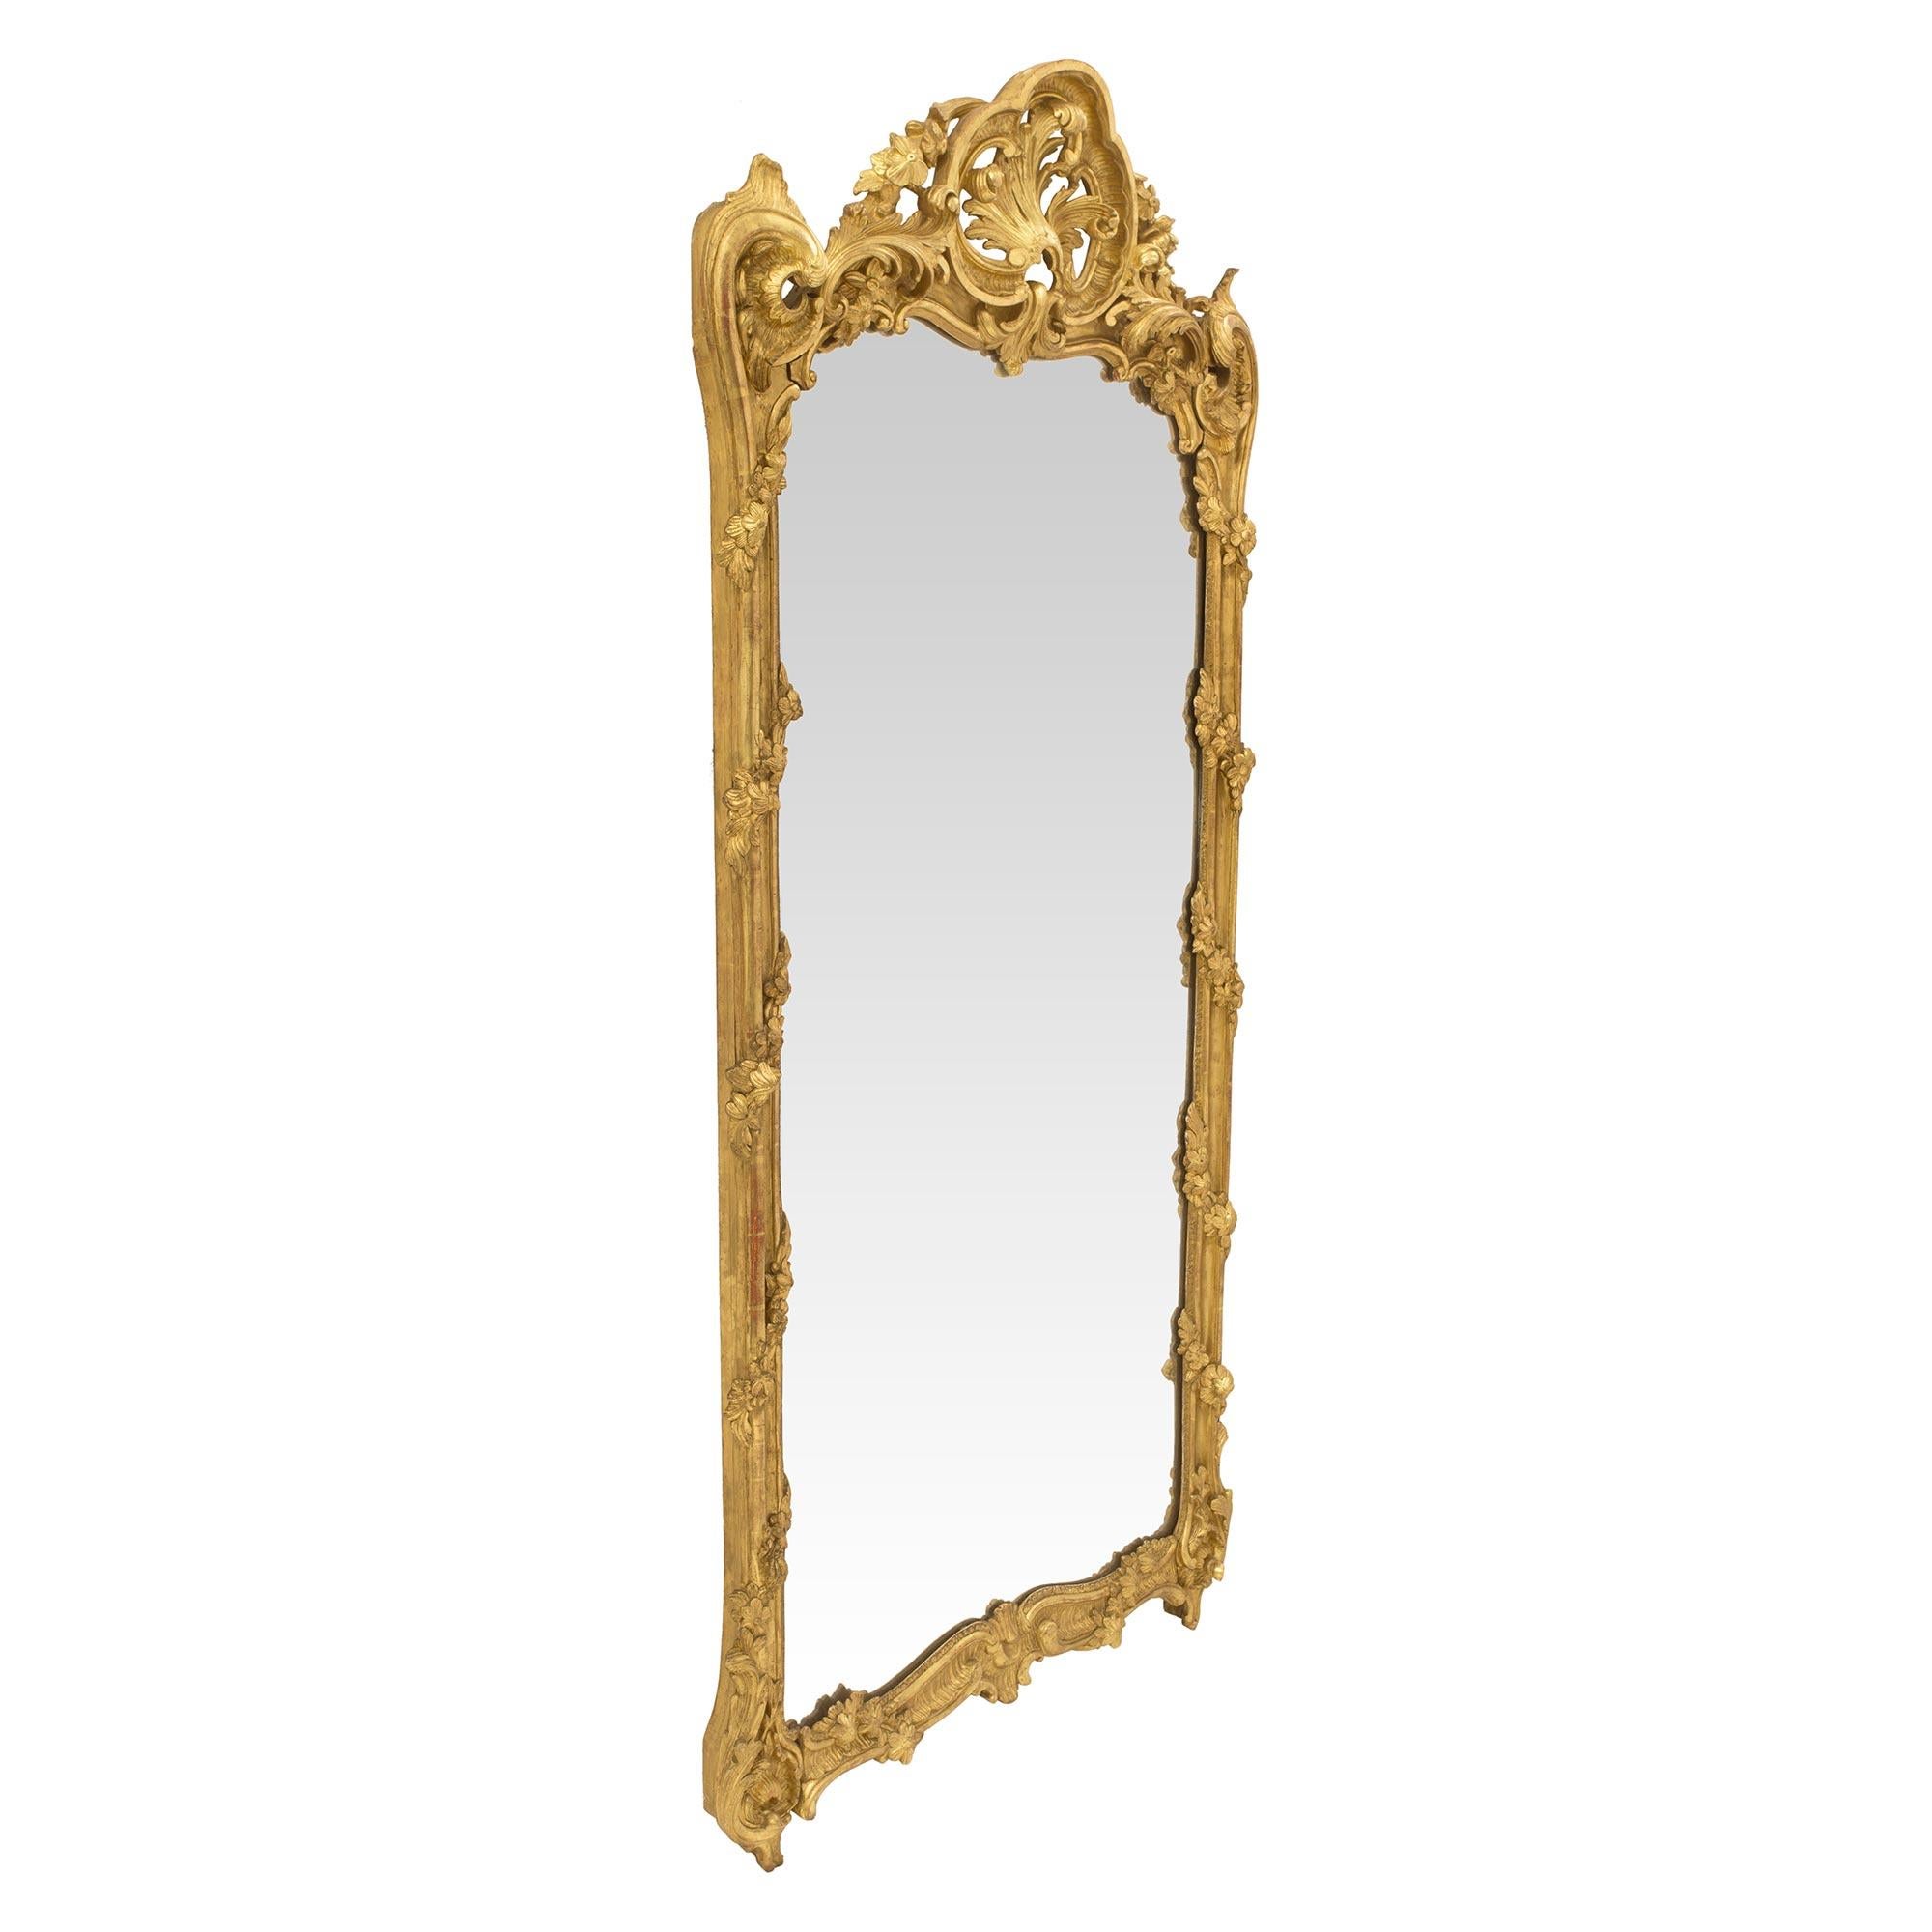 A stunning and large scale French 18th century Régence Period giltwood mirror. The original mirror plate is framed within a beautiful and most decorative mottled border with charming and finely carved wrapped floral garlands. At the base are lovely